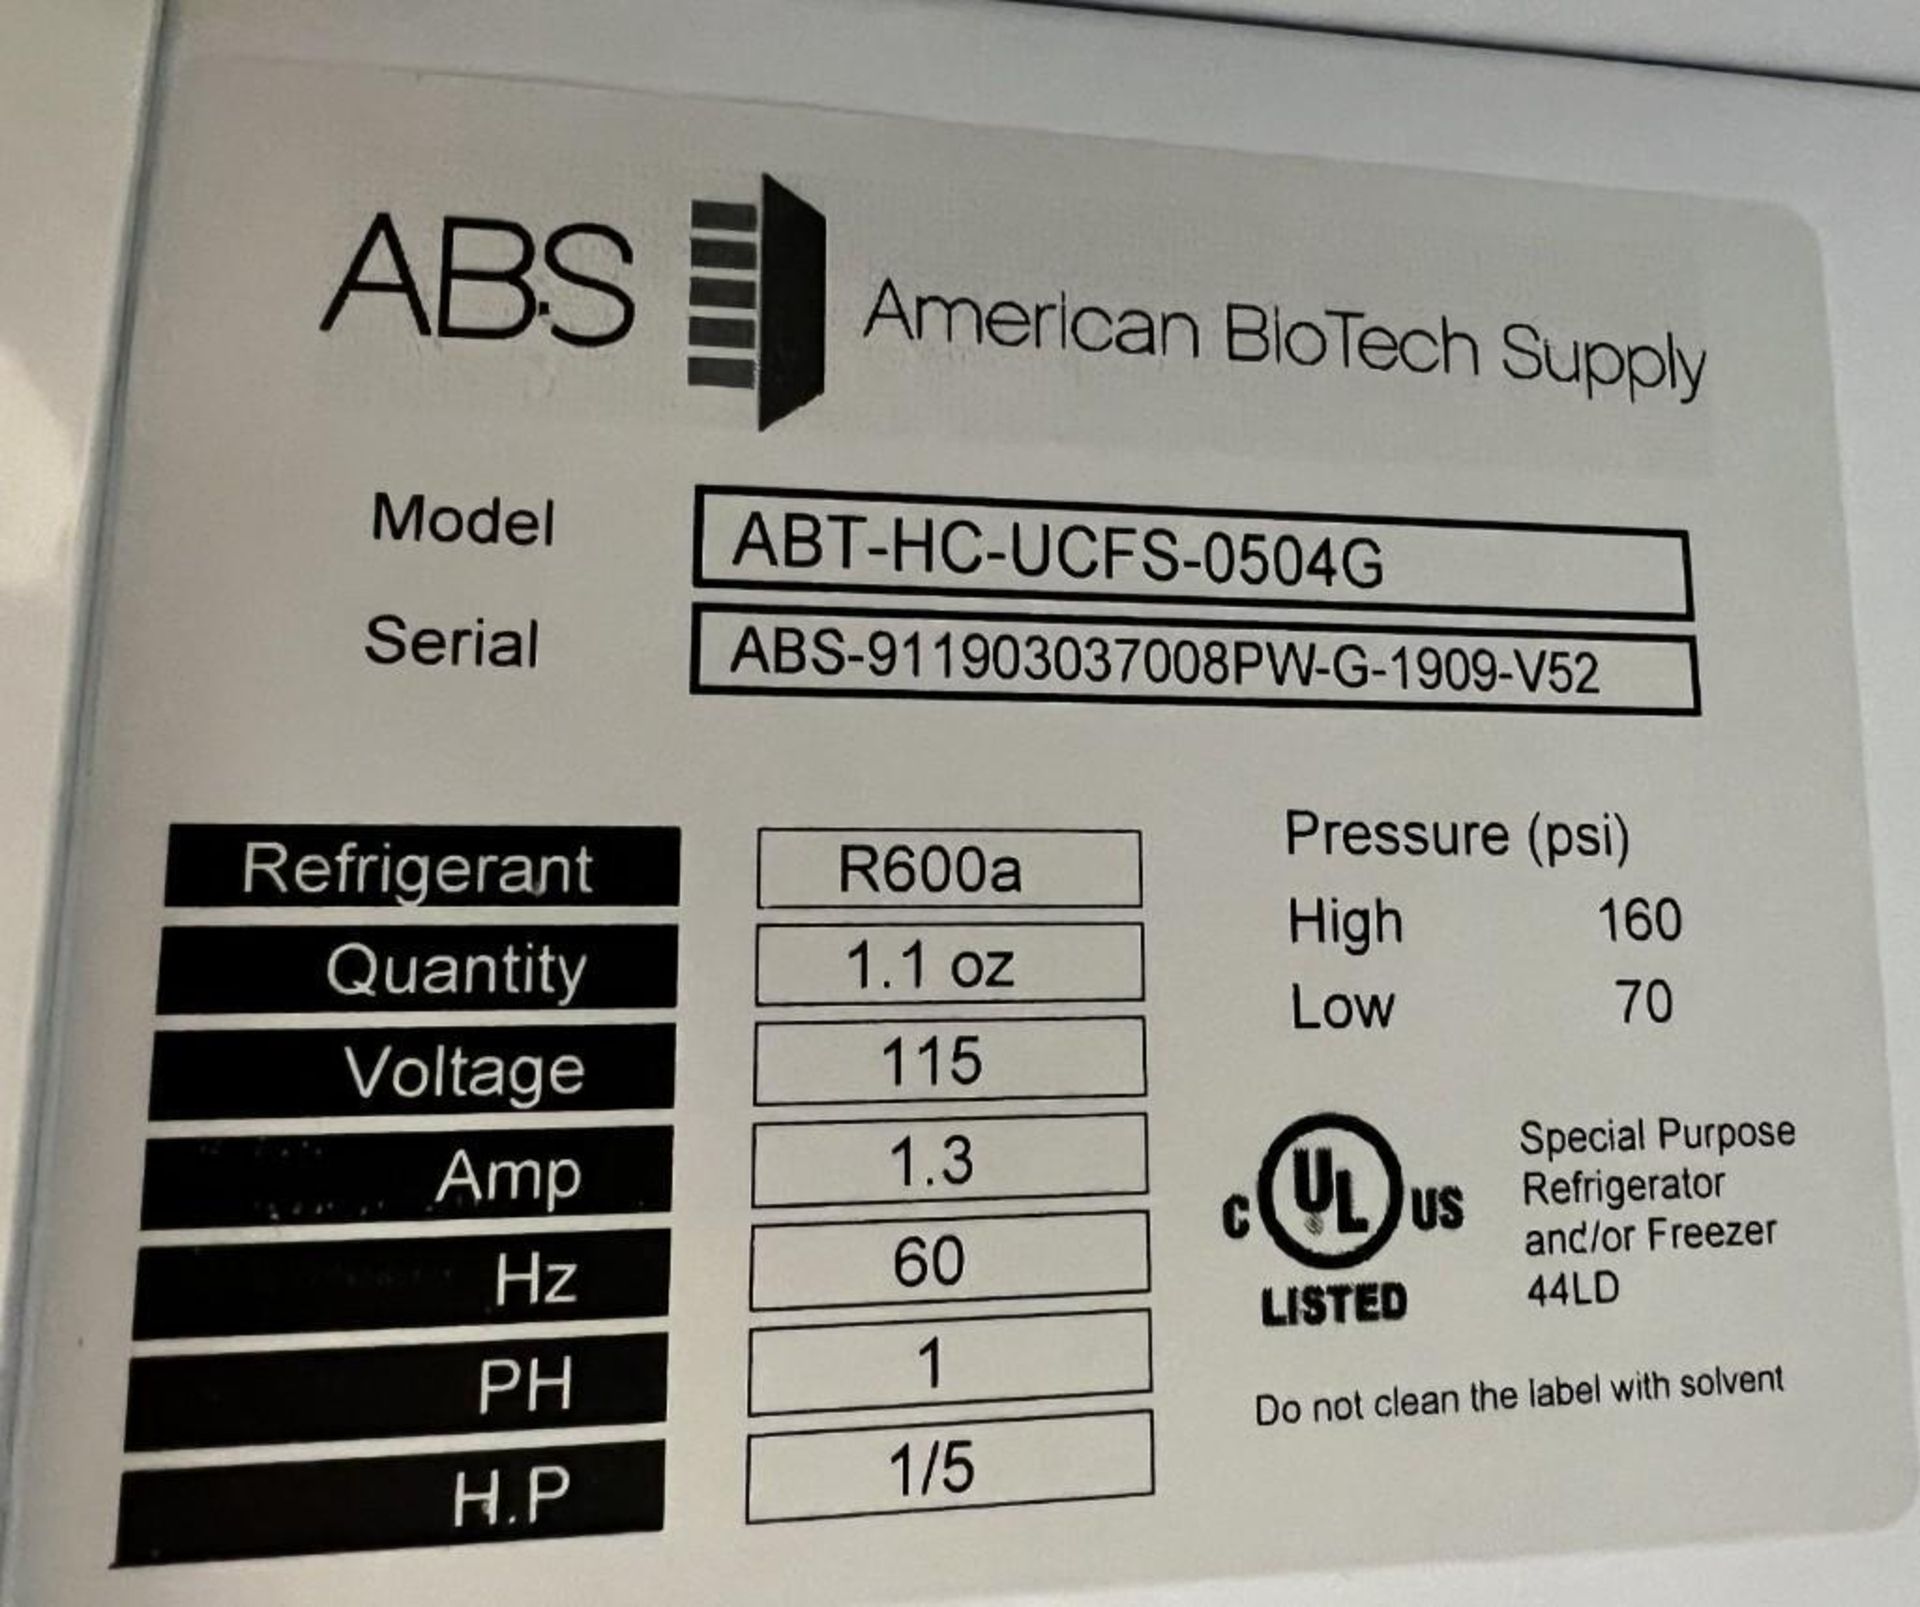 ABS American Biotech Supply Refrigerator, Model ABT-HC-UCFS-0504G, Serial# ABS-911903037008PW-G-1909 - Image 5 of 5